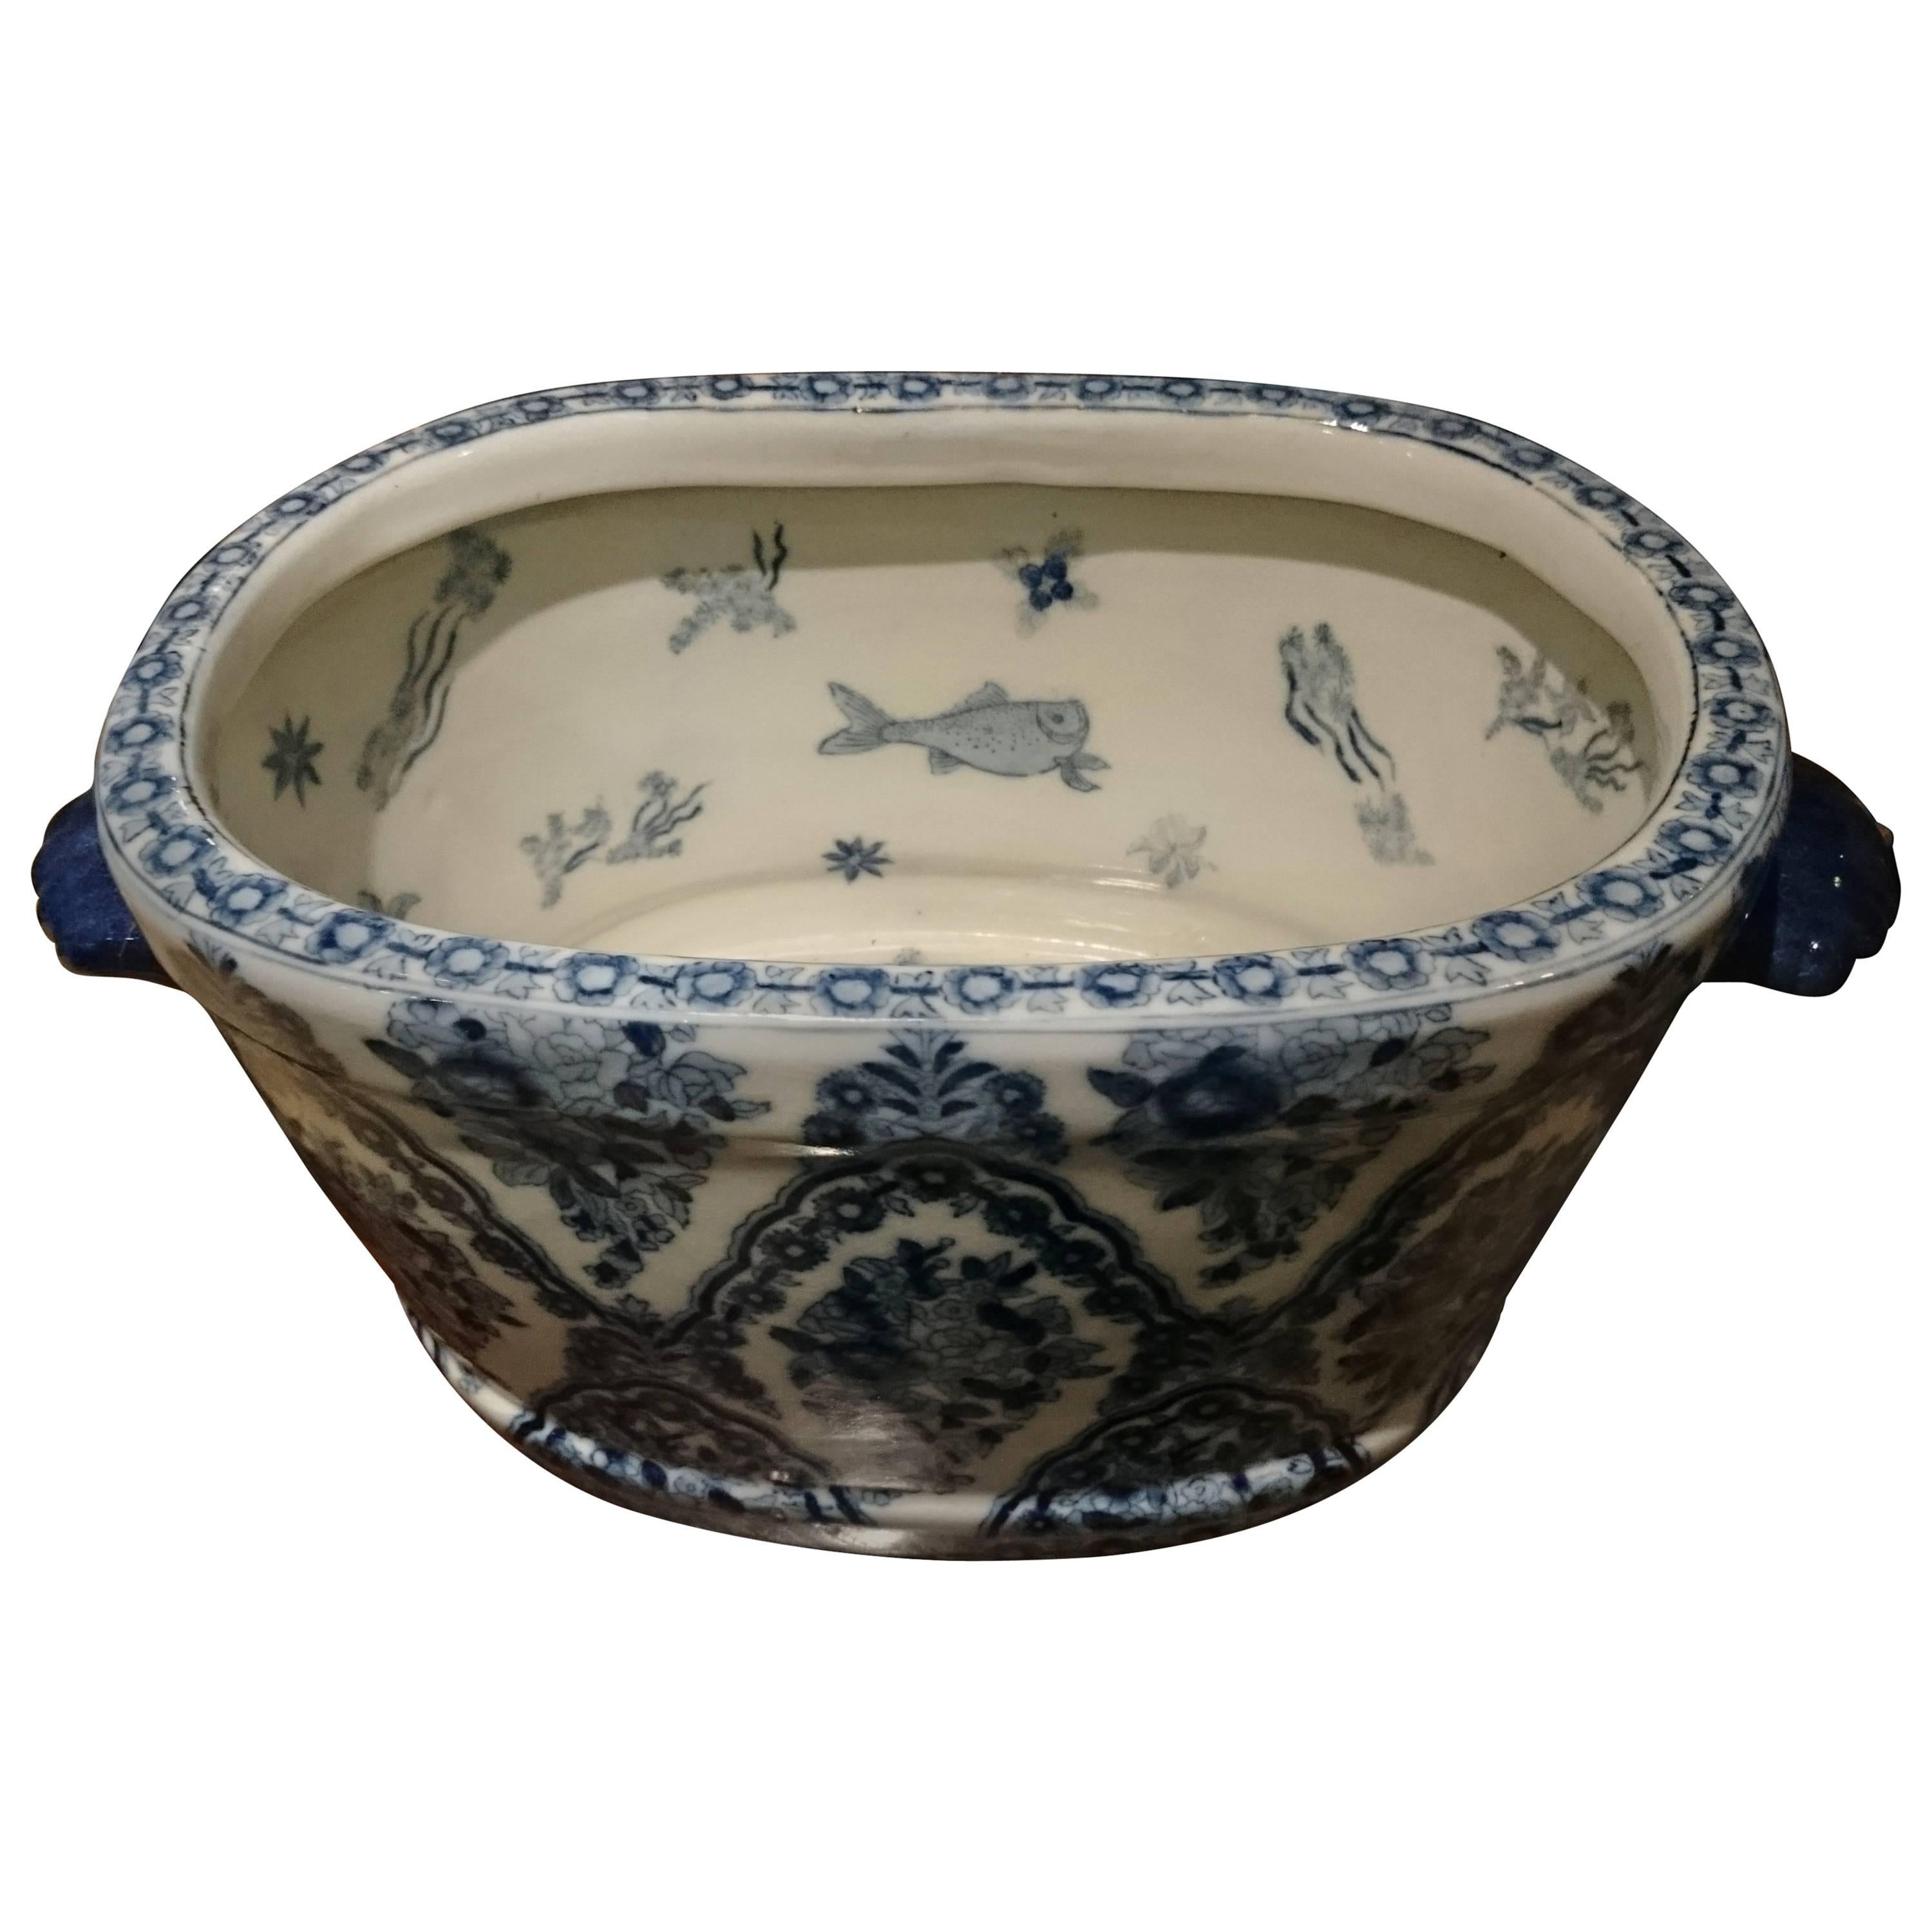 Early 19th Century Chinese Export Porcelain Punch Bowl or Wash Bowl